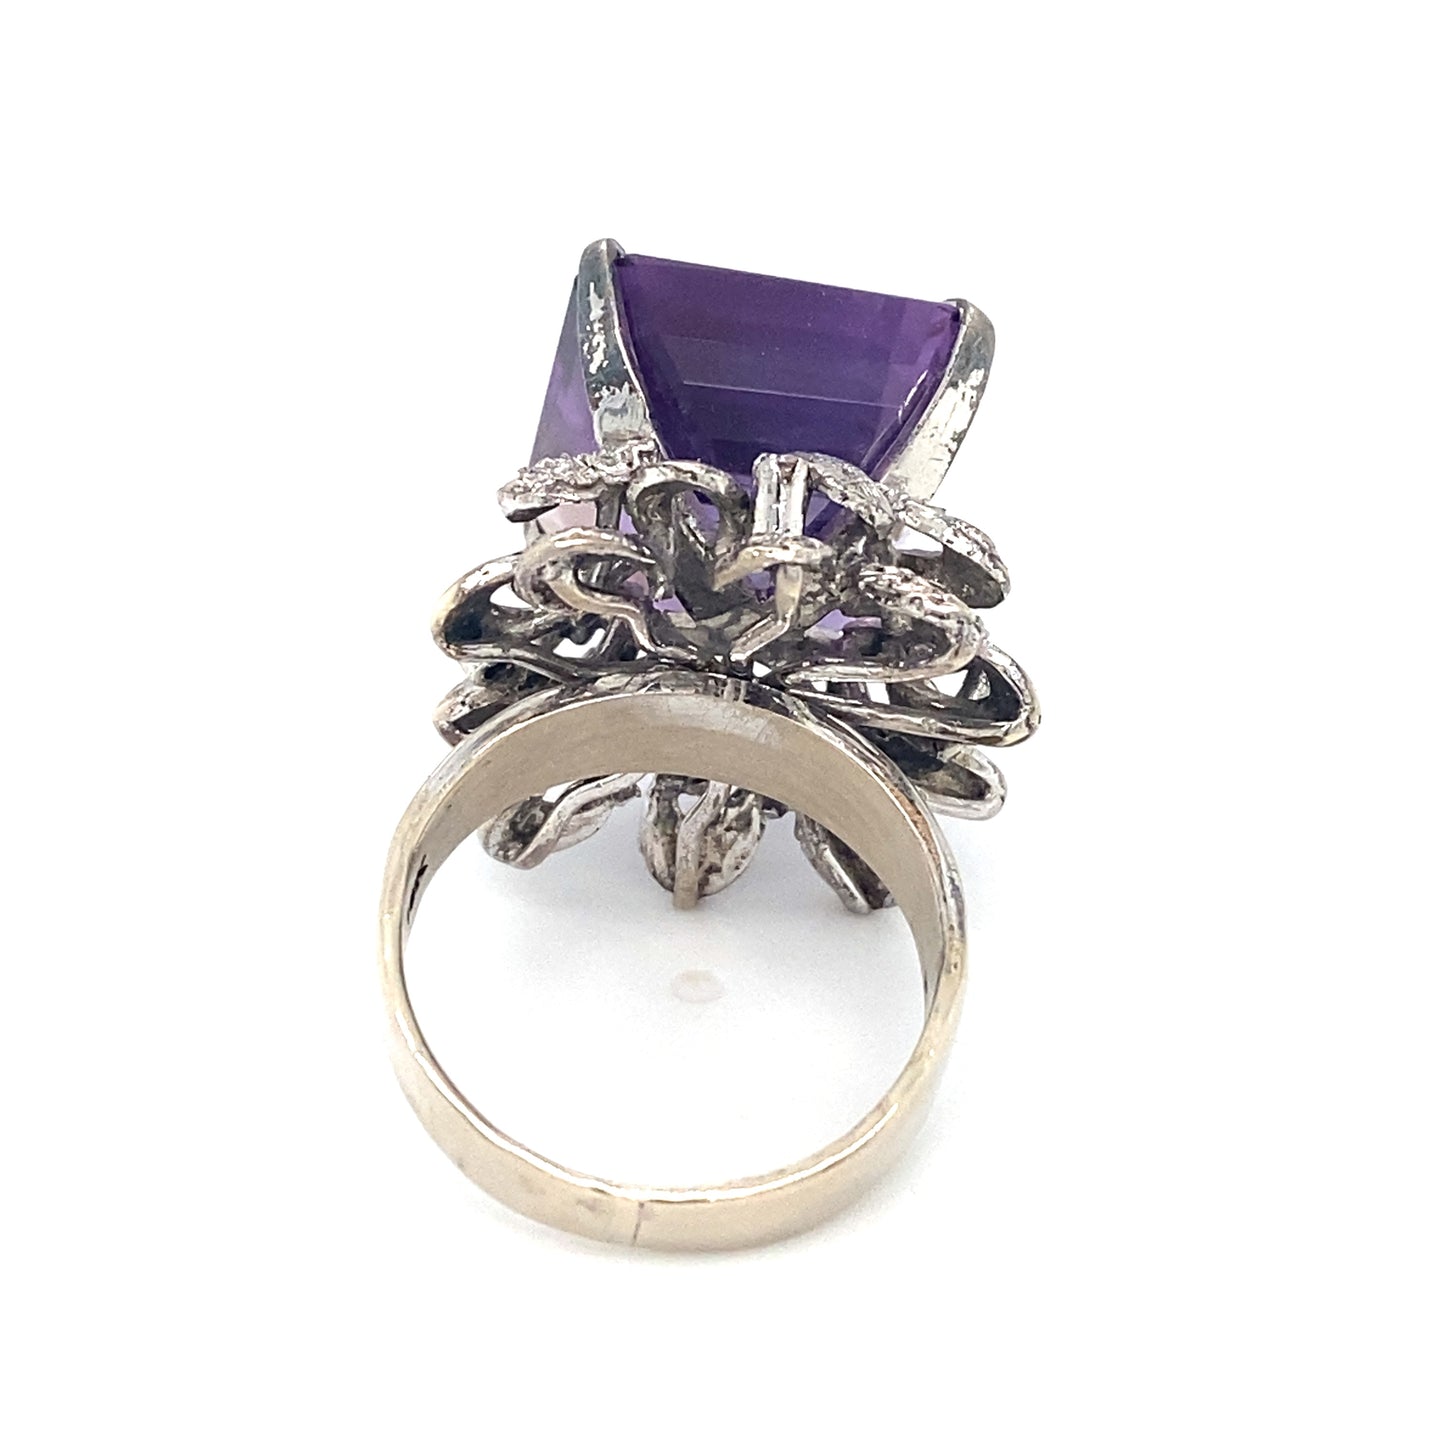 Retro Style 8.0ct Amethyst Cocktail Ring in 18K White Gold